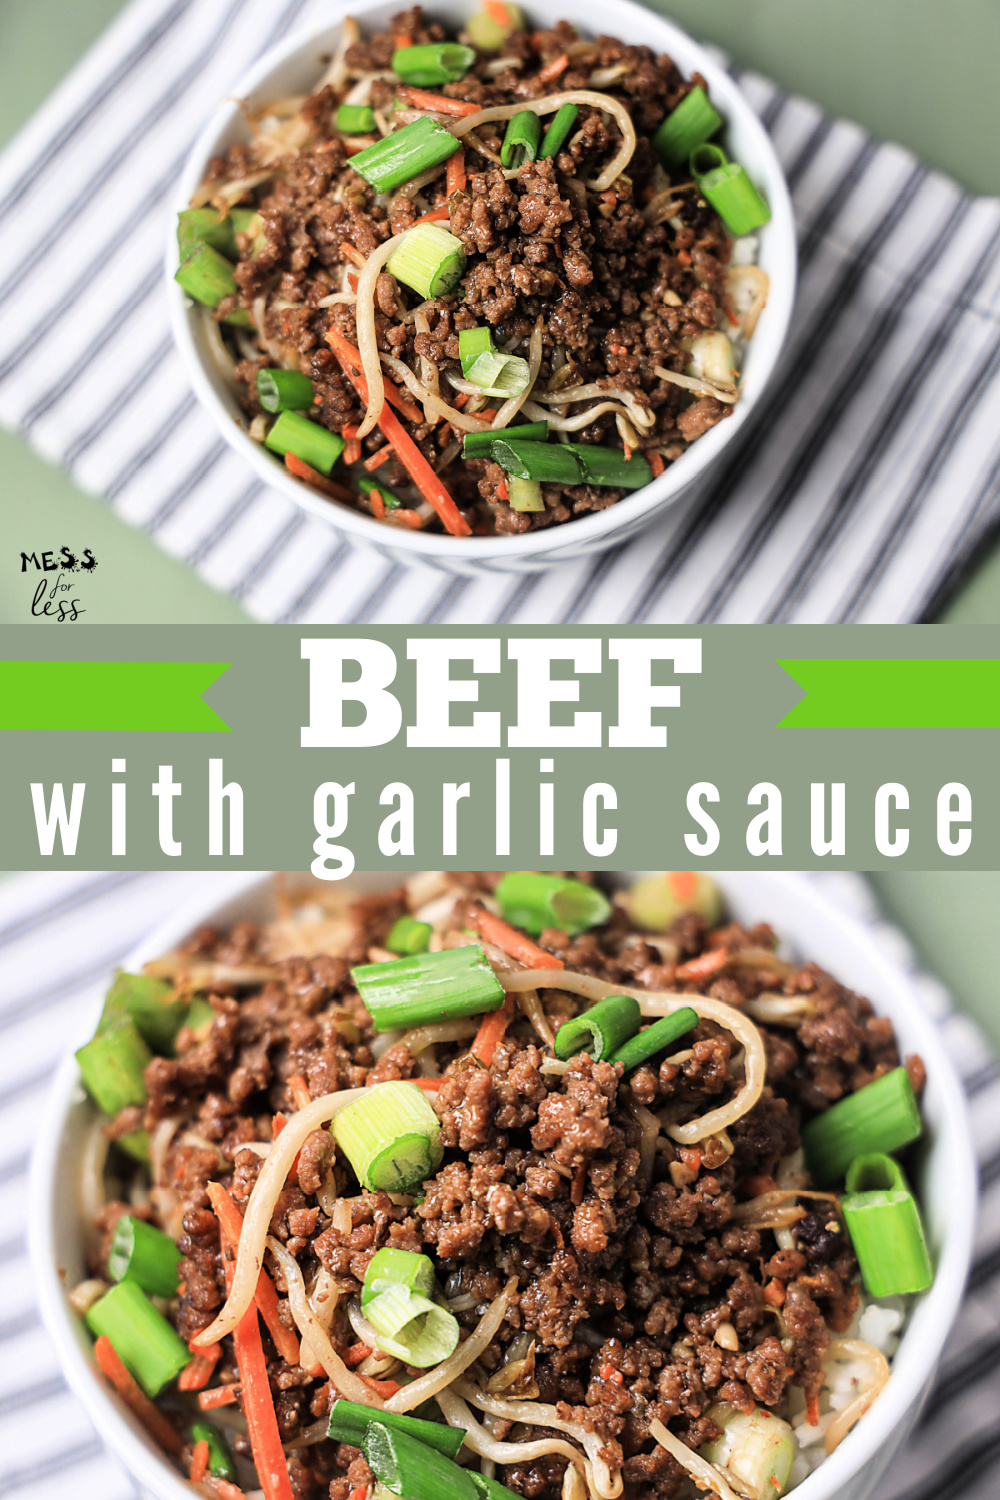 Looking for a way spice up traditional ground beef? Look no further than this Beef with Garlic Sauce. This recipe combines tender ground beef with a variety of sauces and spices to create a dish to rival your favorite takeout restaurant.